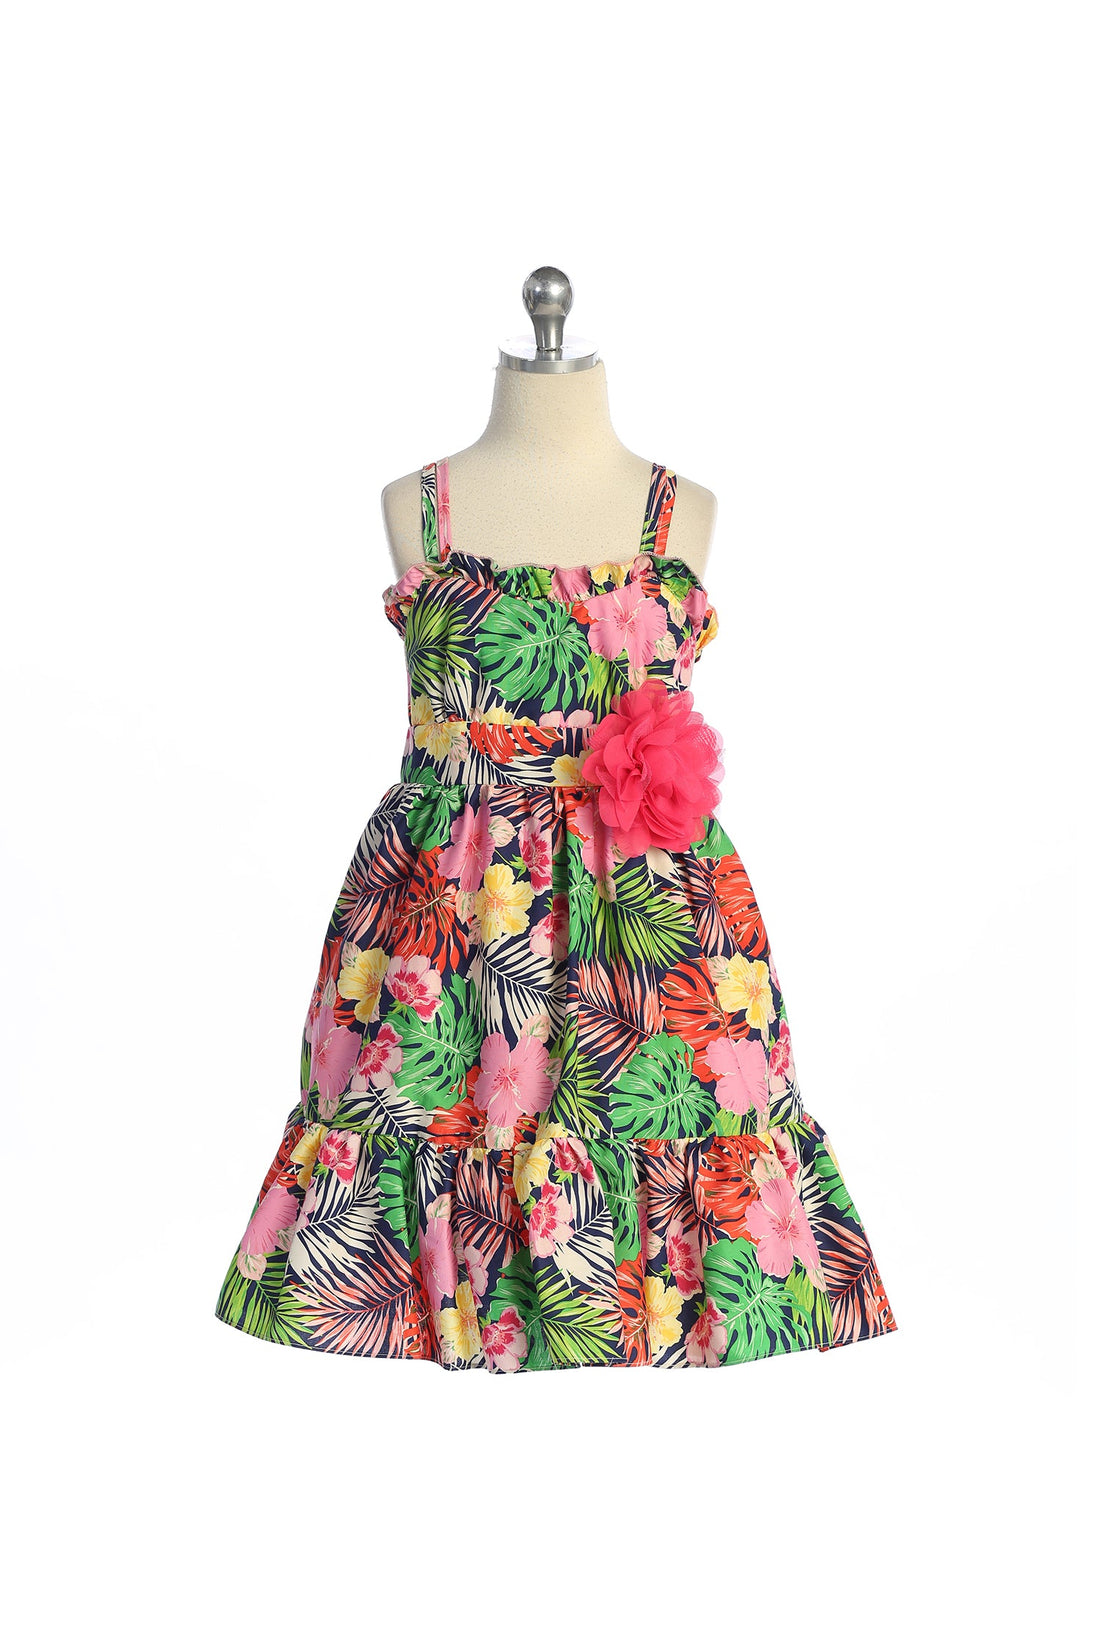 Girl Party Ruffle Tropical Cotton Dress by AS536C Kids Dream - Girl Formal Dresses